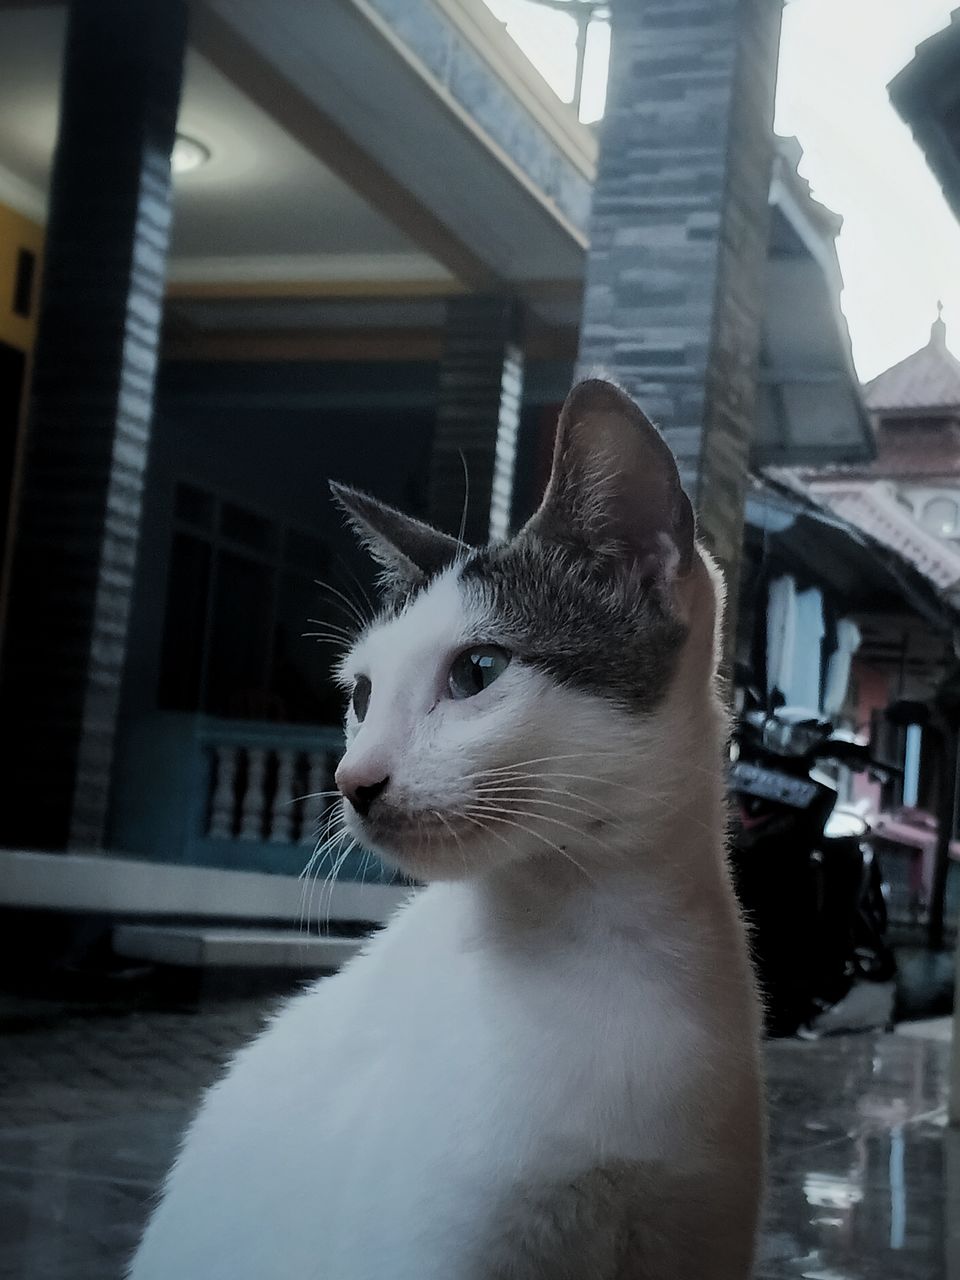 animal themes, animal, one animal, pet, mammal, cat, domestic animals, white, domestic cat, feline, architecture, whiskers, looking, small to medium-sized cats, no people, built structure, building exterior, felidae, window, looking away, day, close-up, animal body part